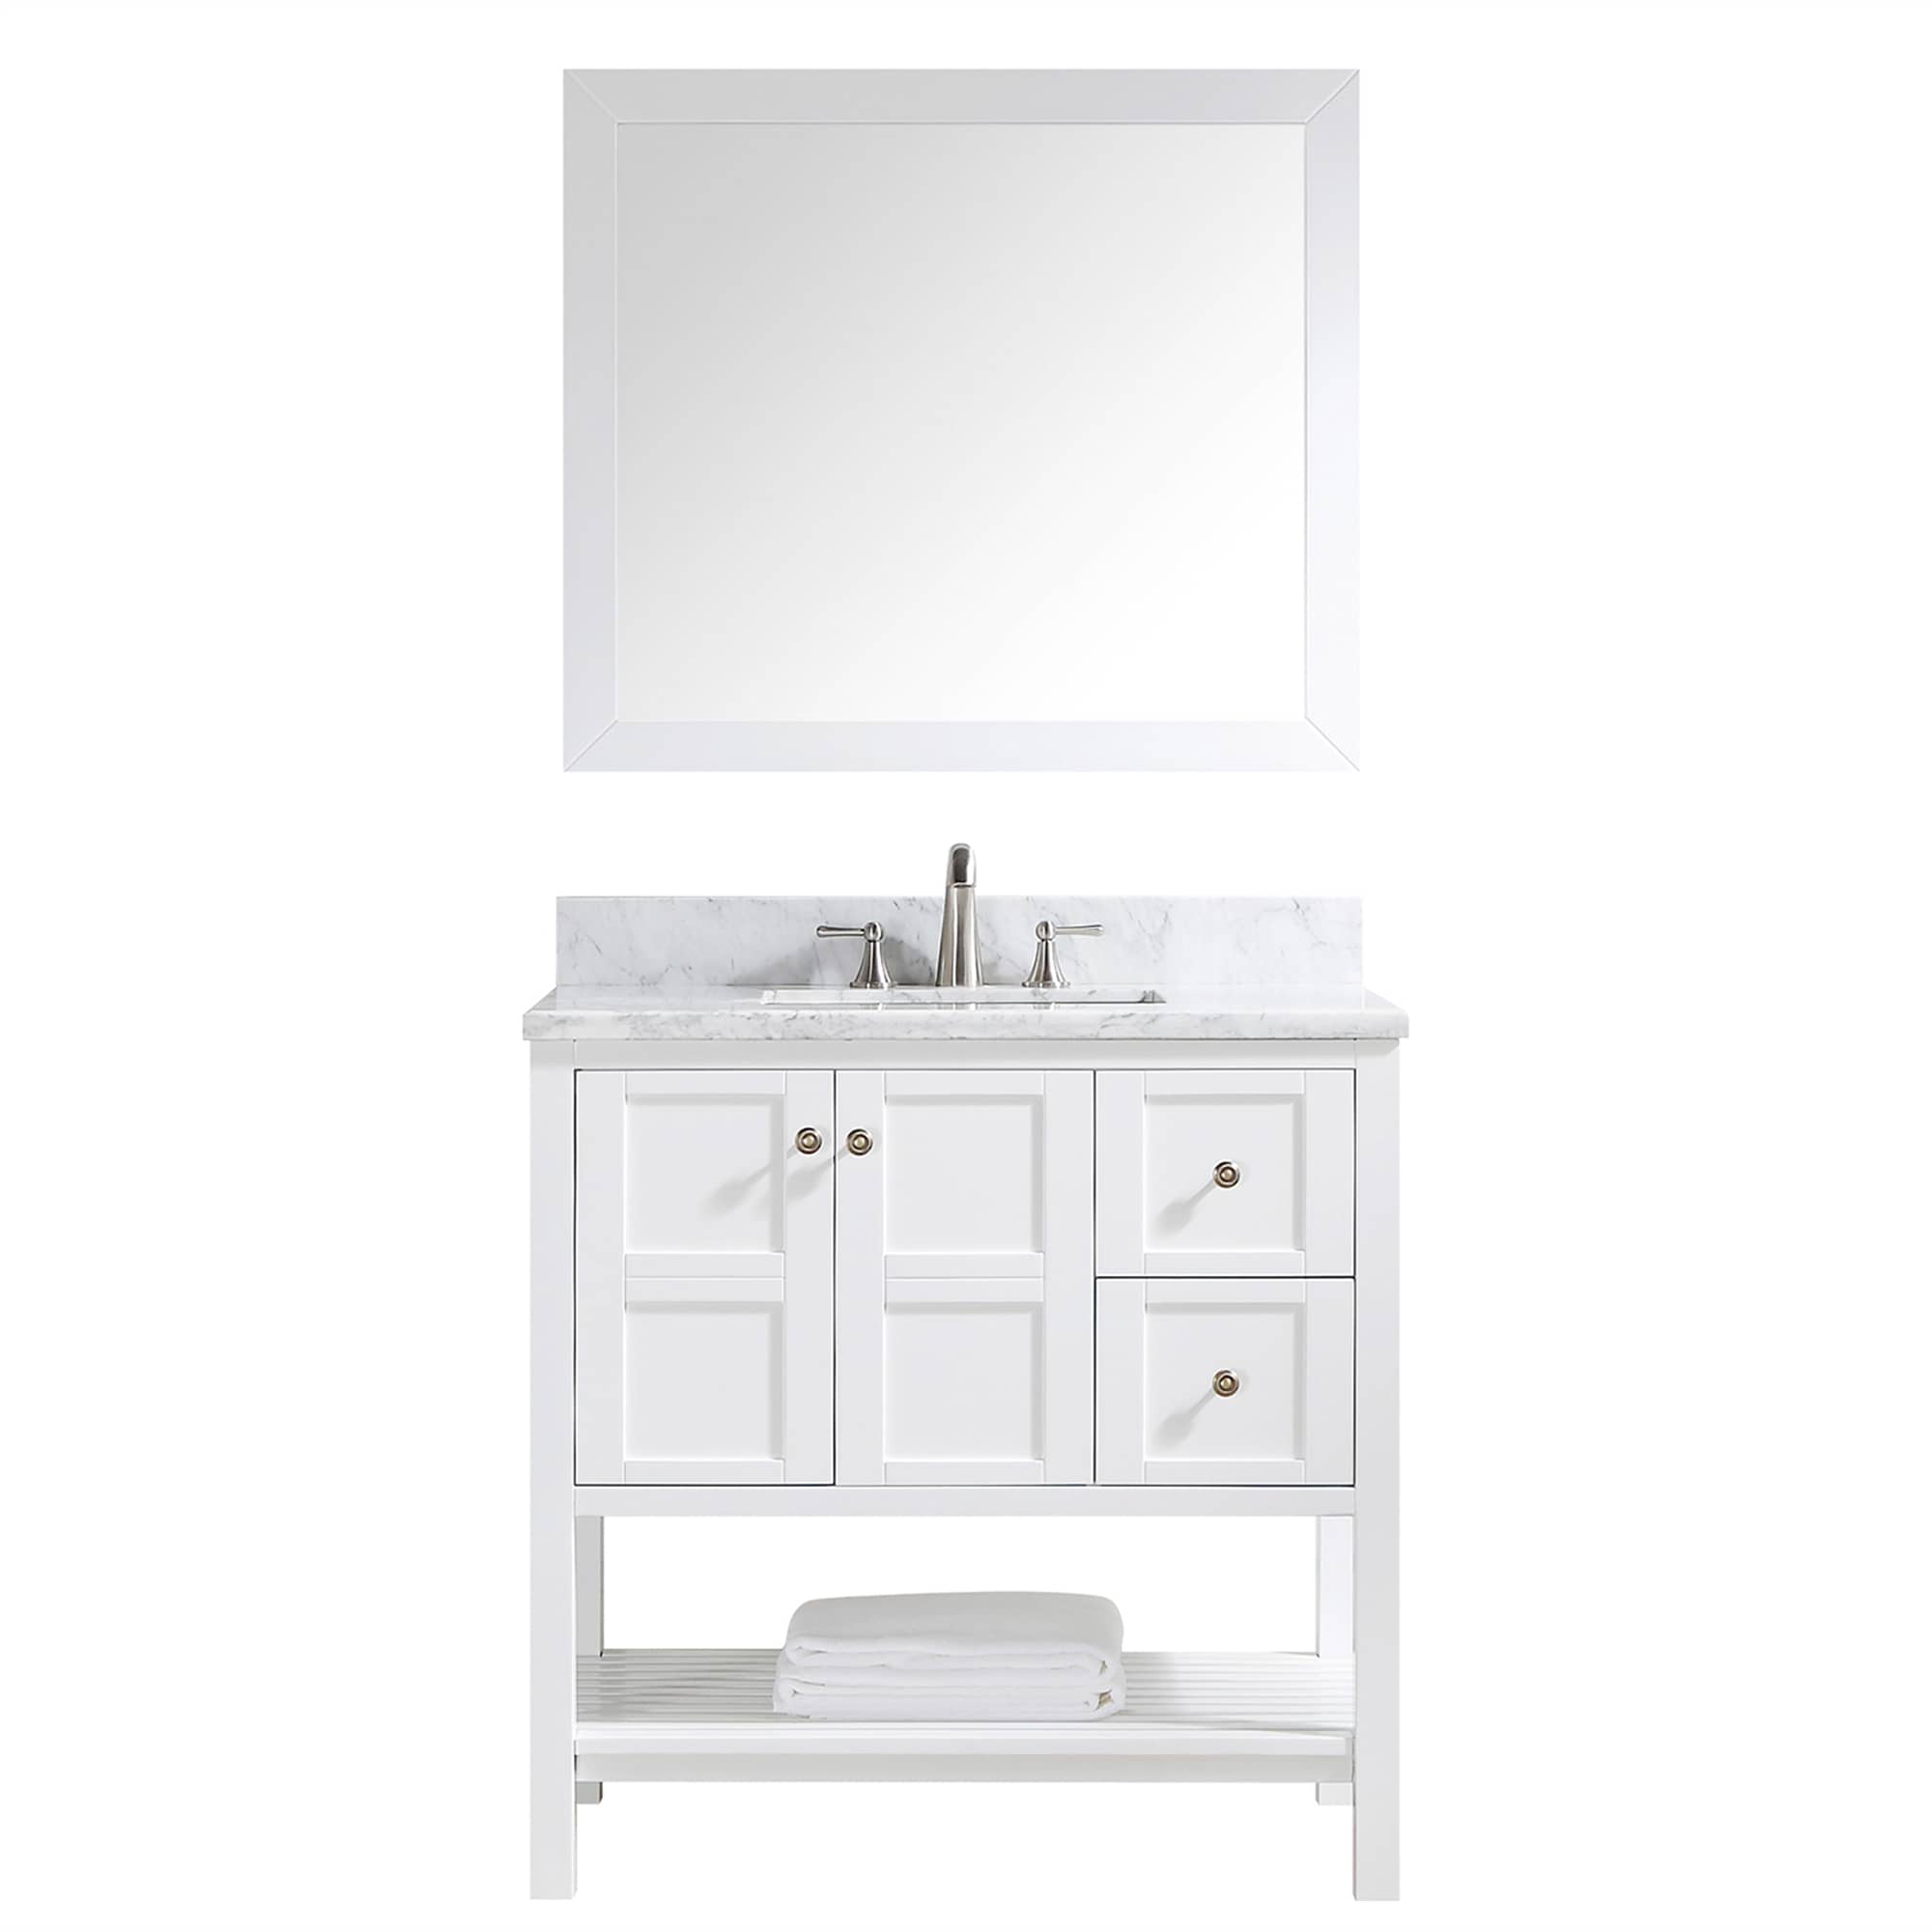 CASAINC 36 Inch Bath Vanity in White with White Top and Basin (36W x 22D x 35.4"H )-Casainc Canada